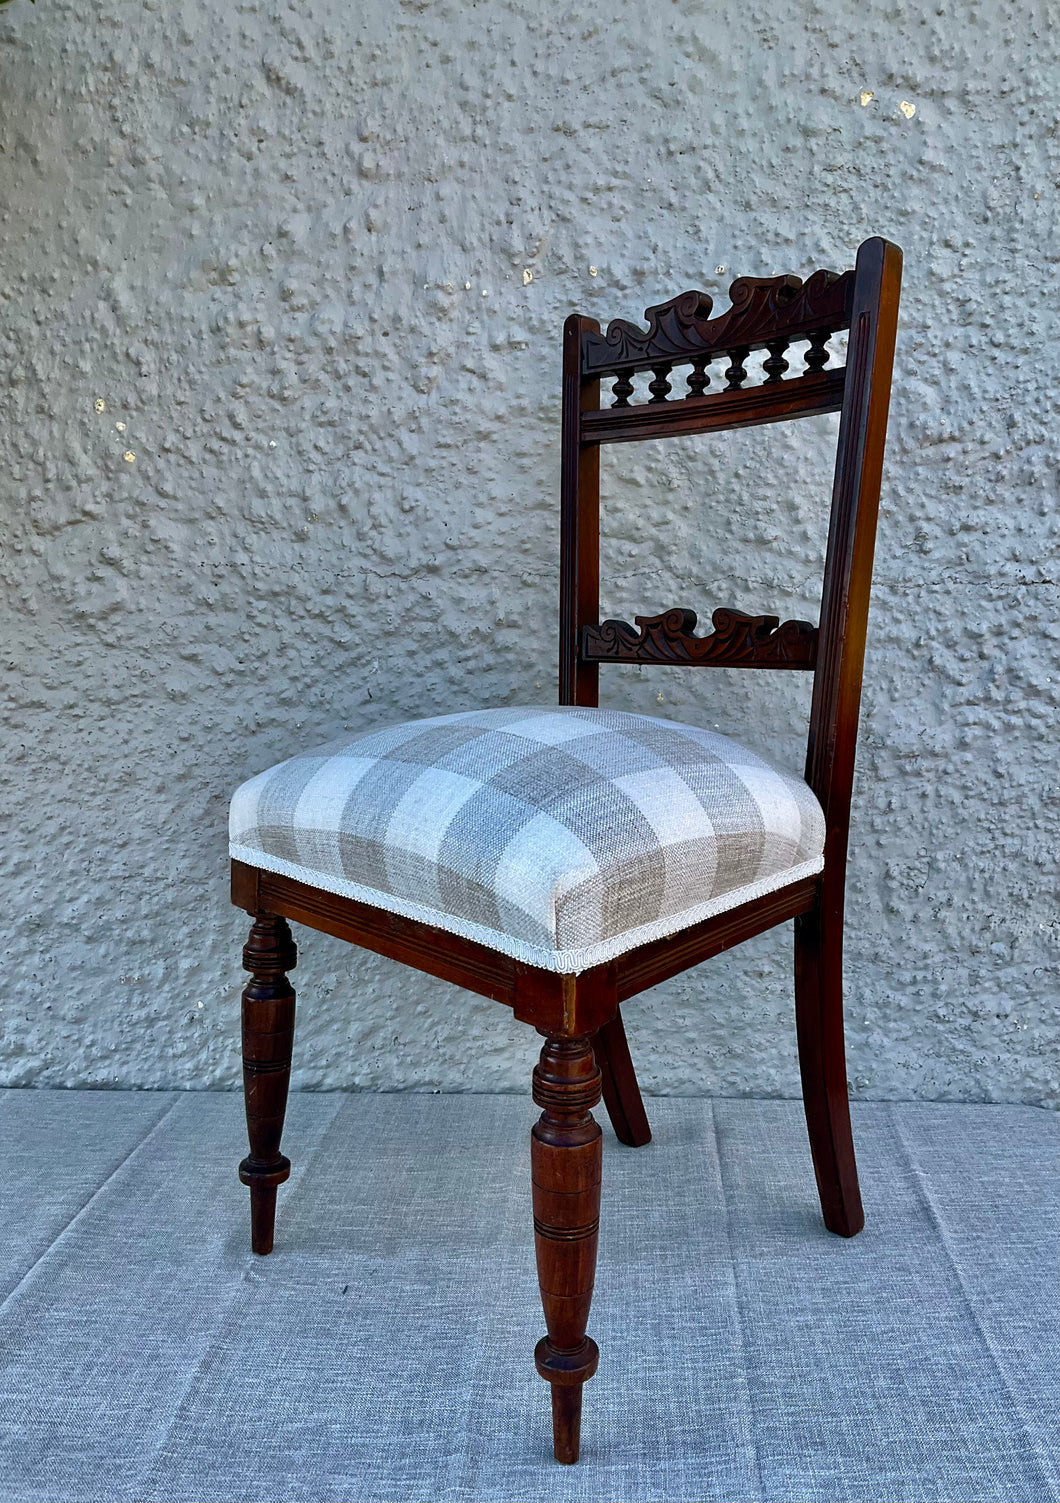 Antique Reupholstered Chair